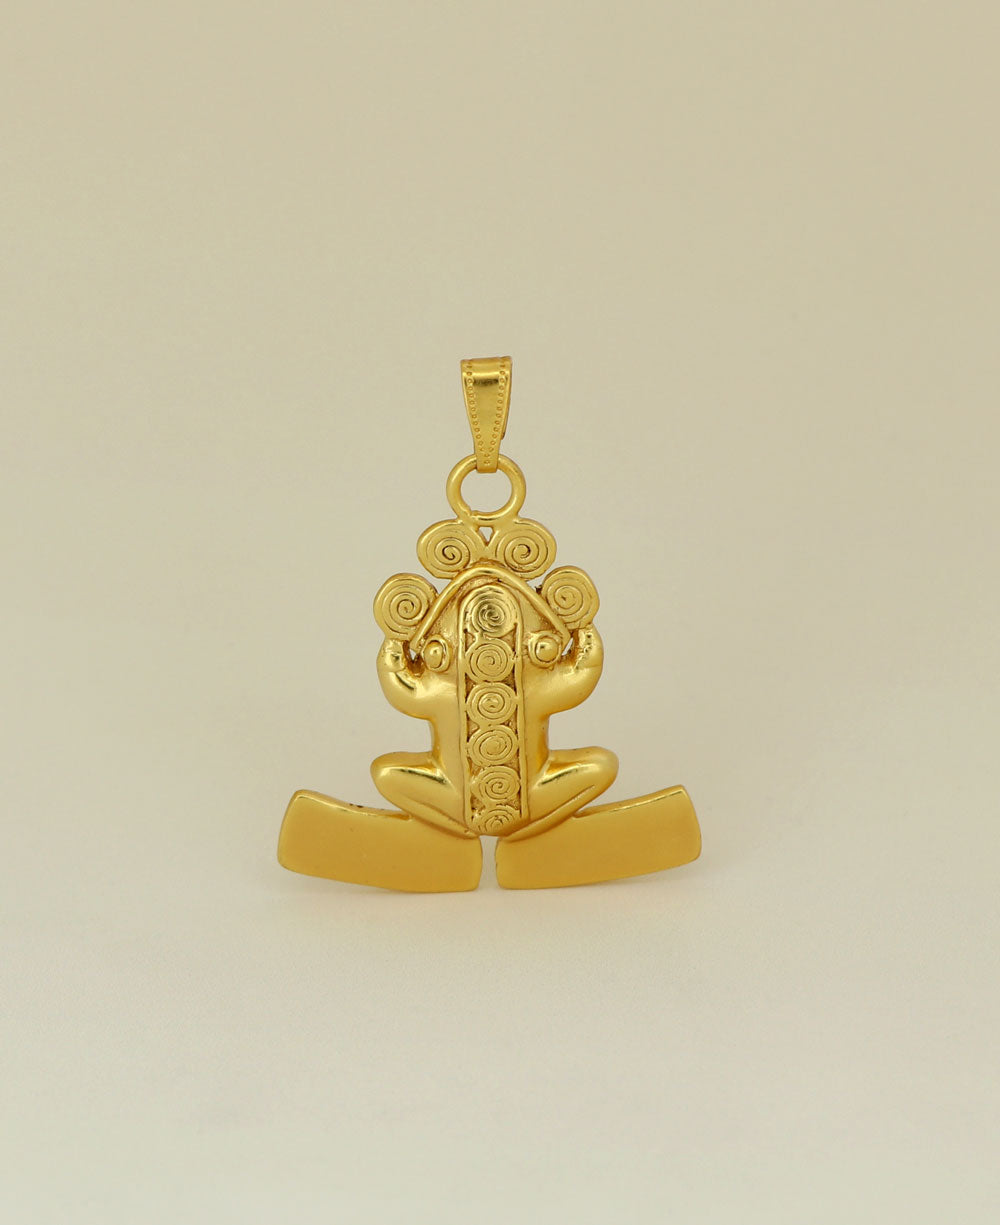 Close-up view of the beautifully crafted gold frog pendant, displaying detailed workmanship.